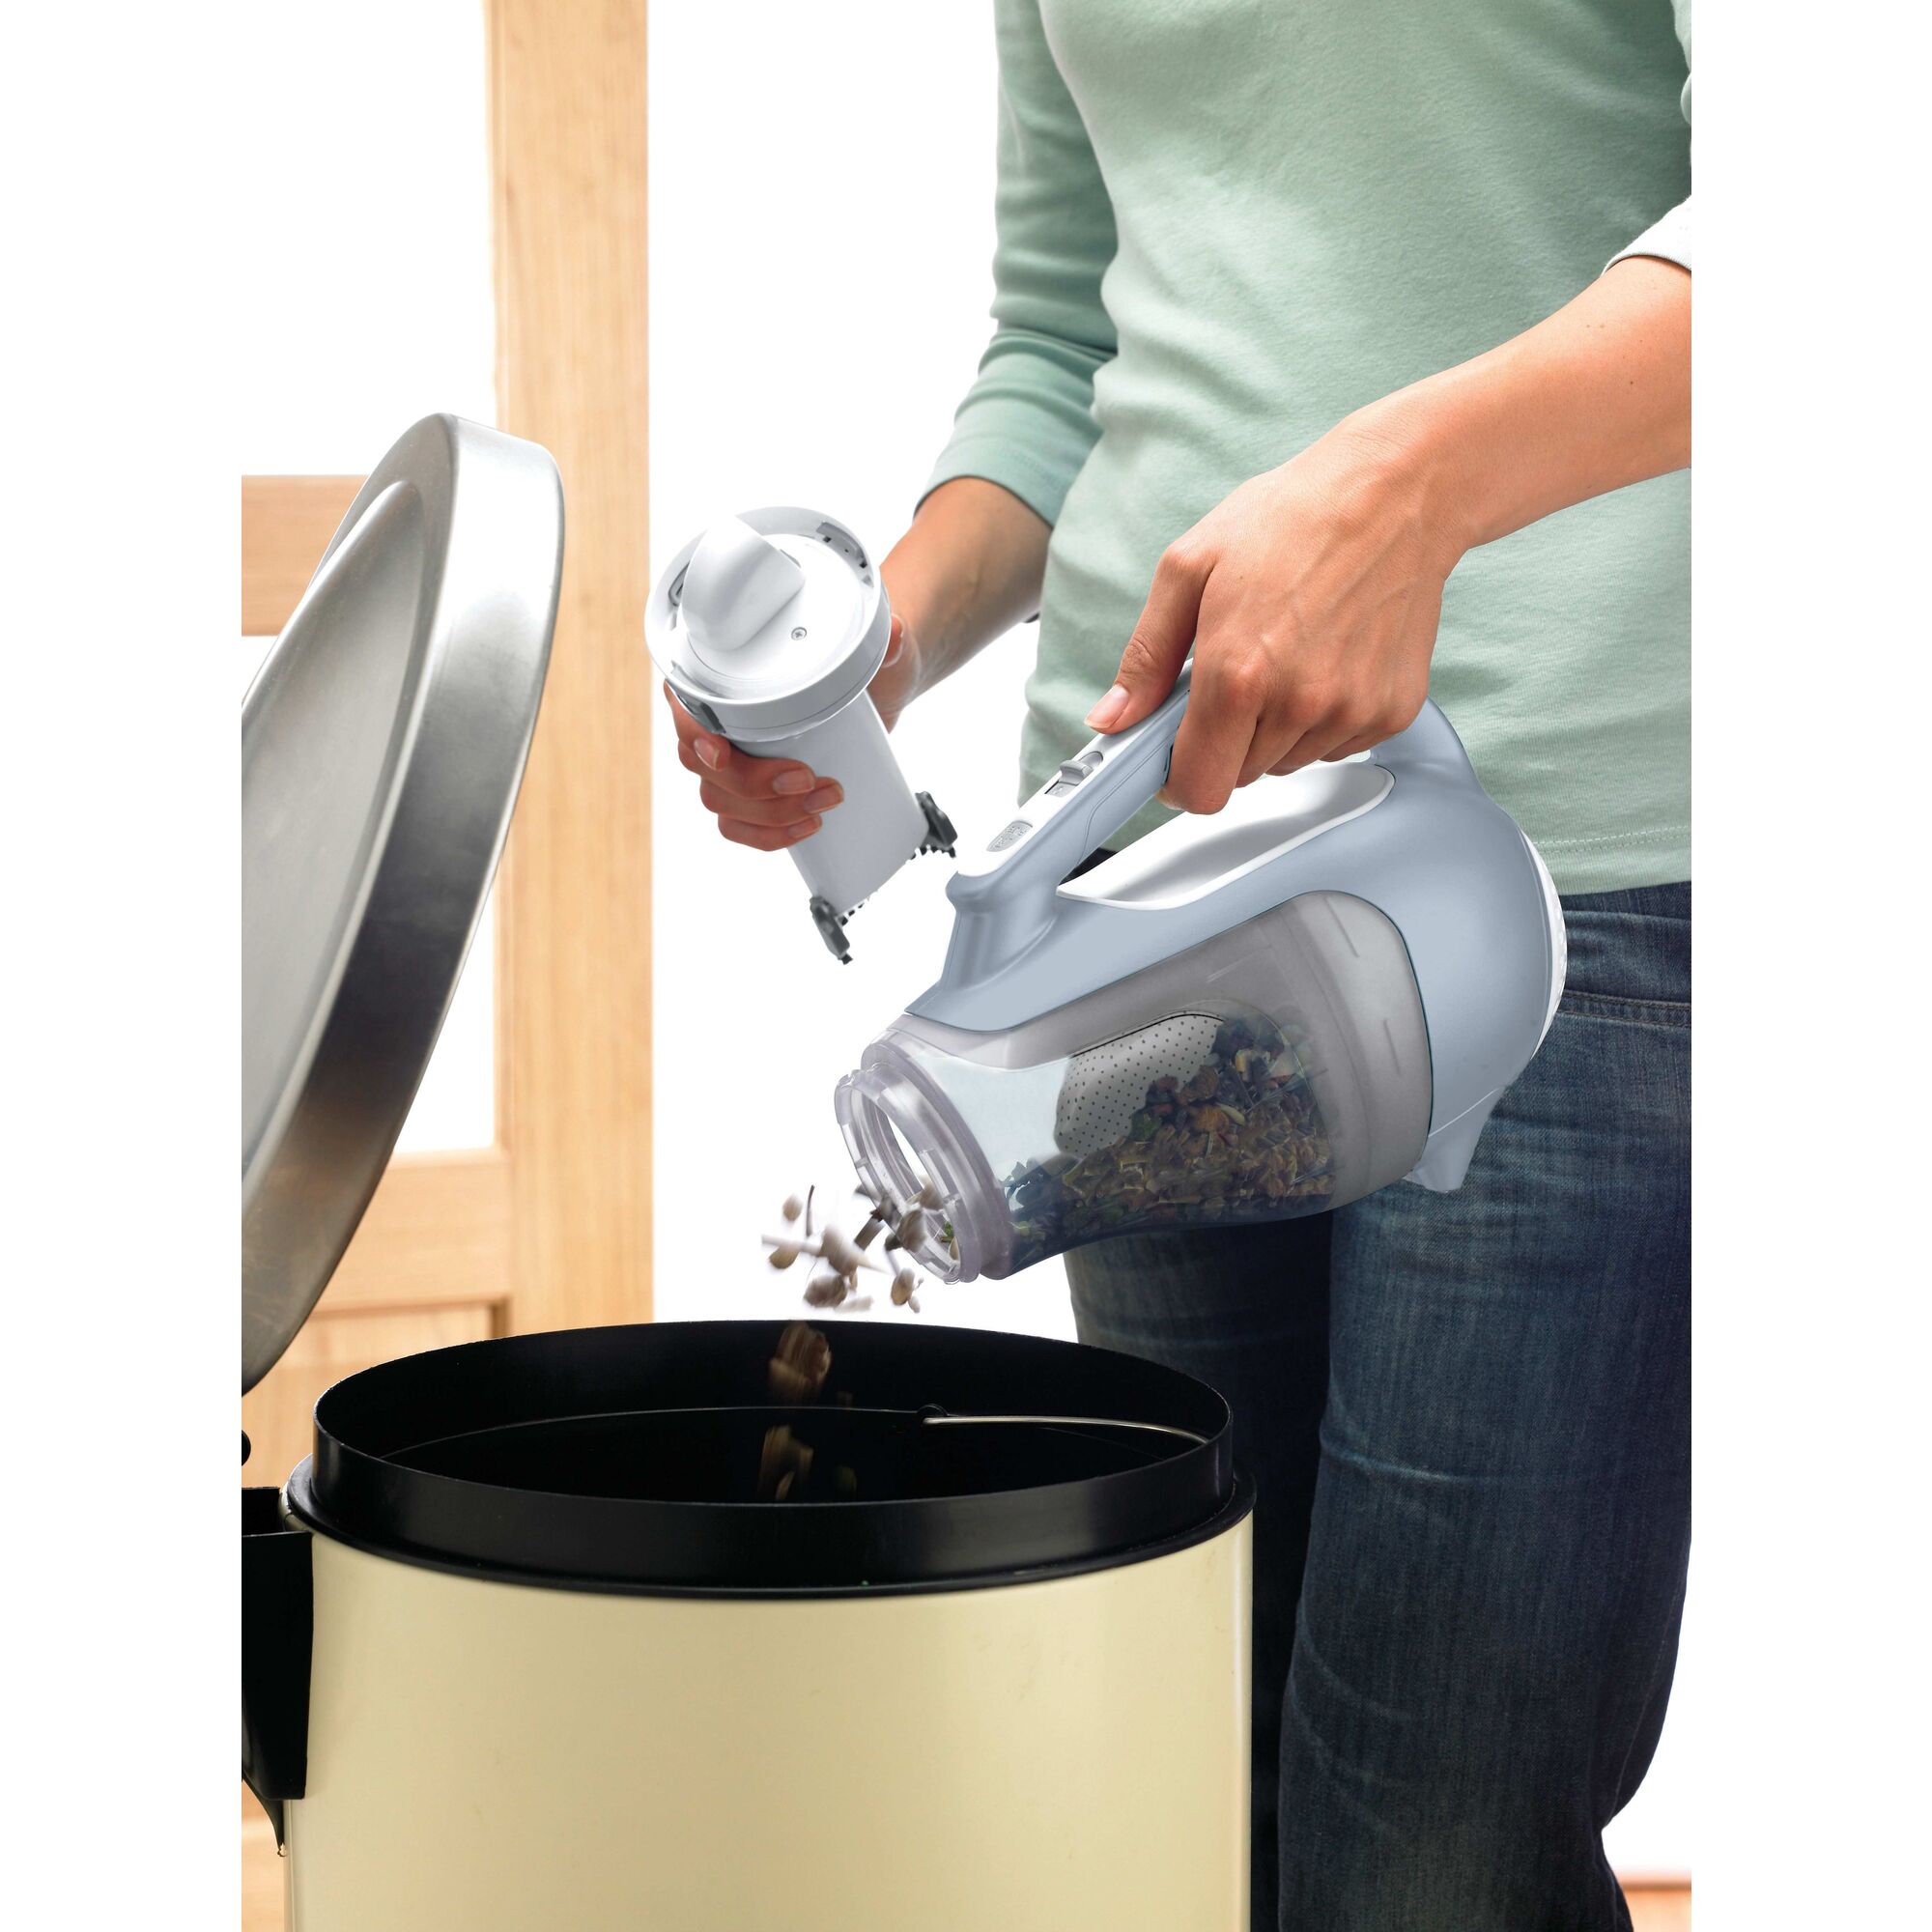 Dustbuster Cordless Hand Vacuum with pull out crevice tool.